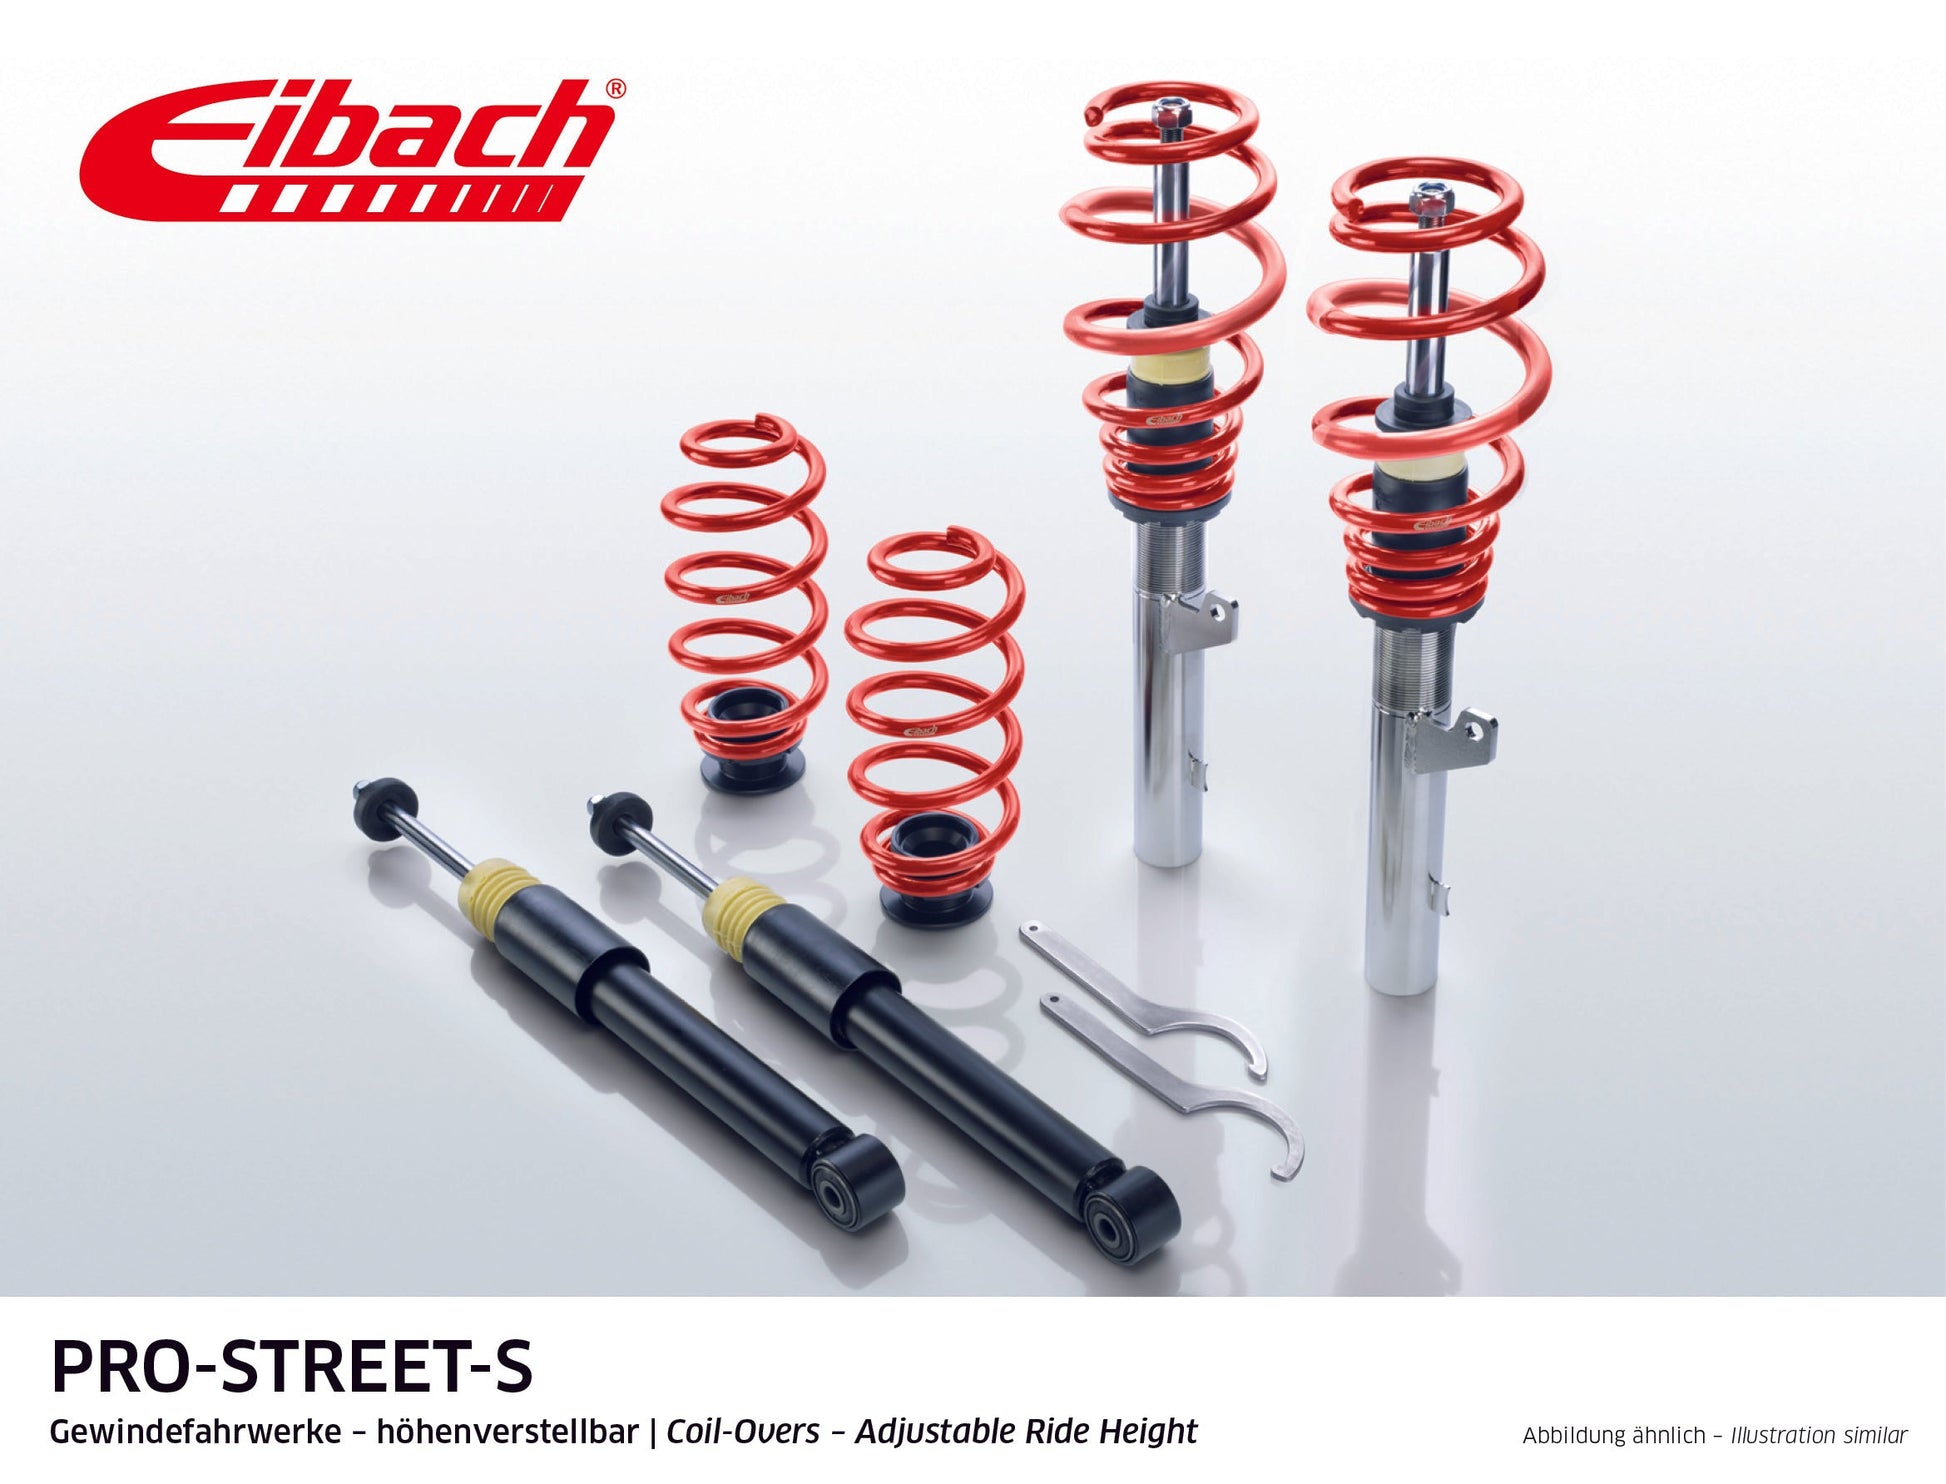 Eibach Pro-Street Coilover (PSS65-15-006-04-22) at £1217.92